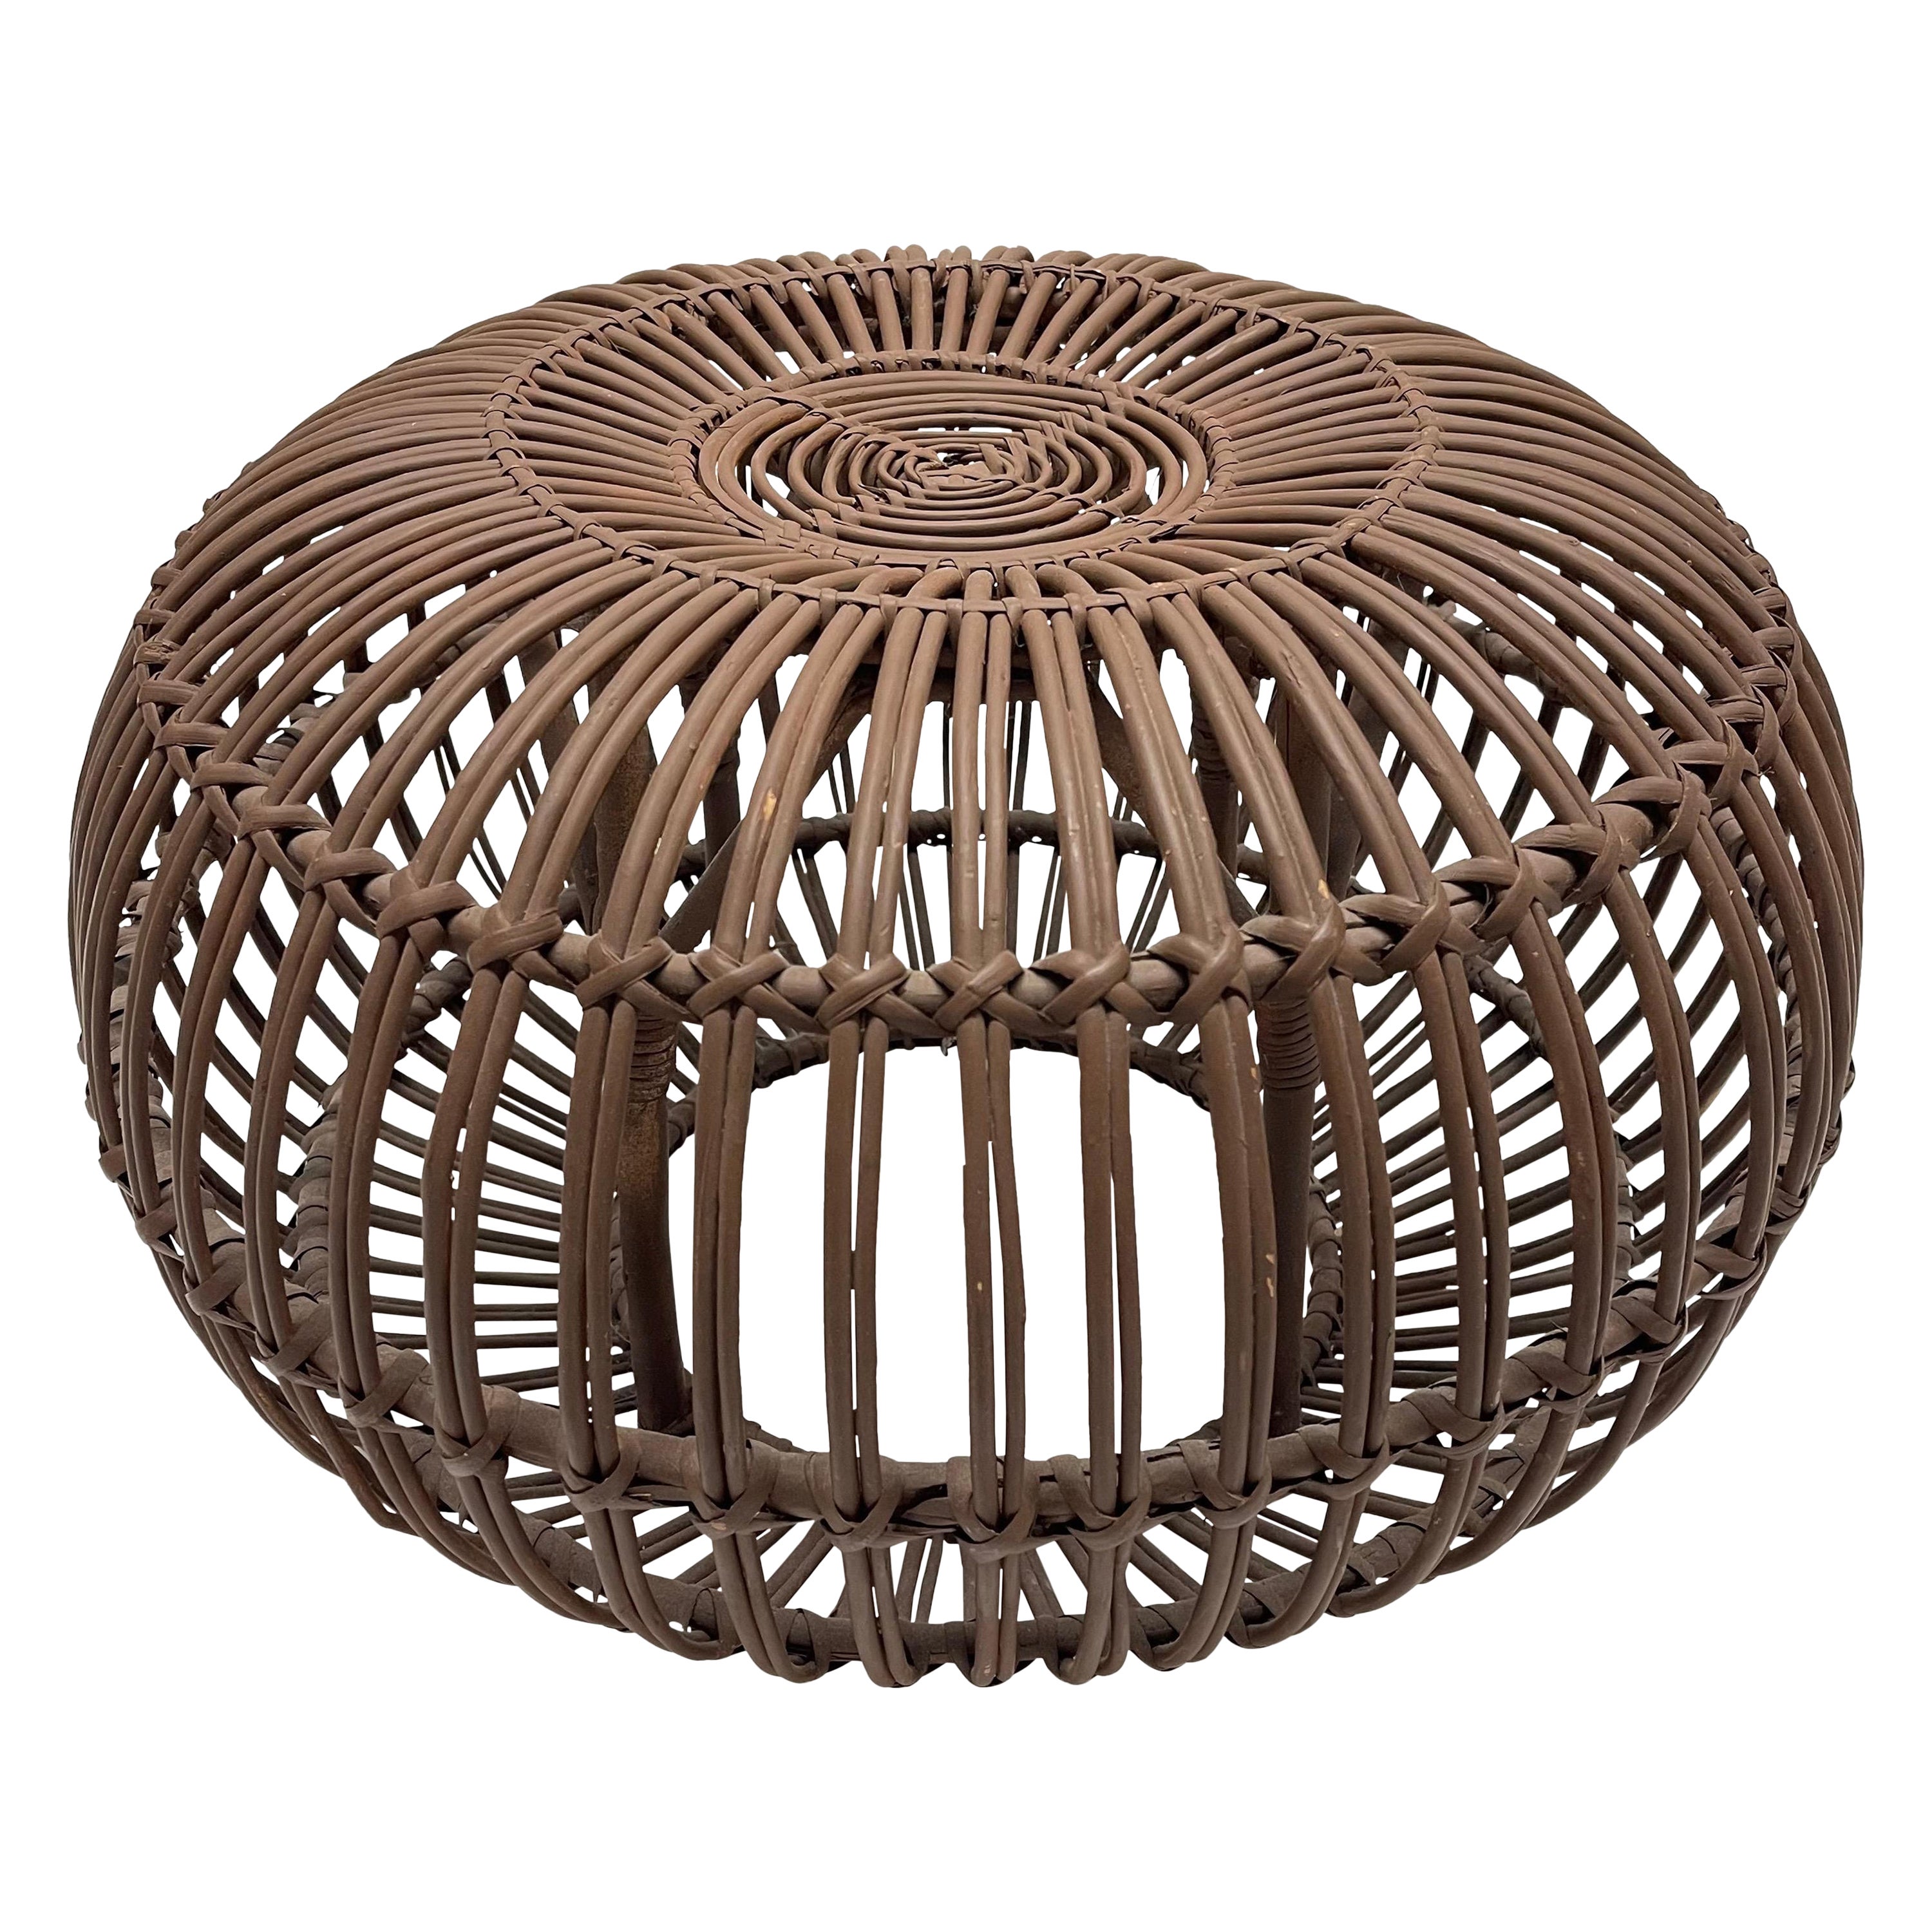 Rattan Footstool, Ottoman, or Pouf in the Style of Ico Parisi, circa 1960's